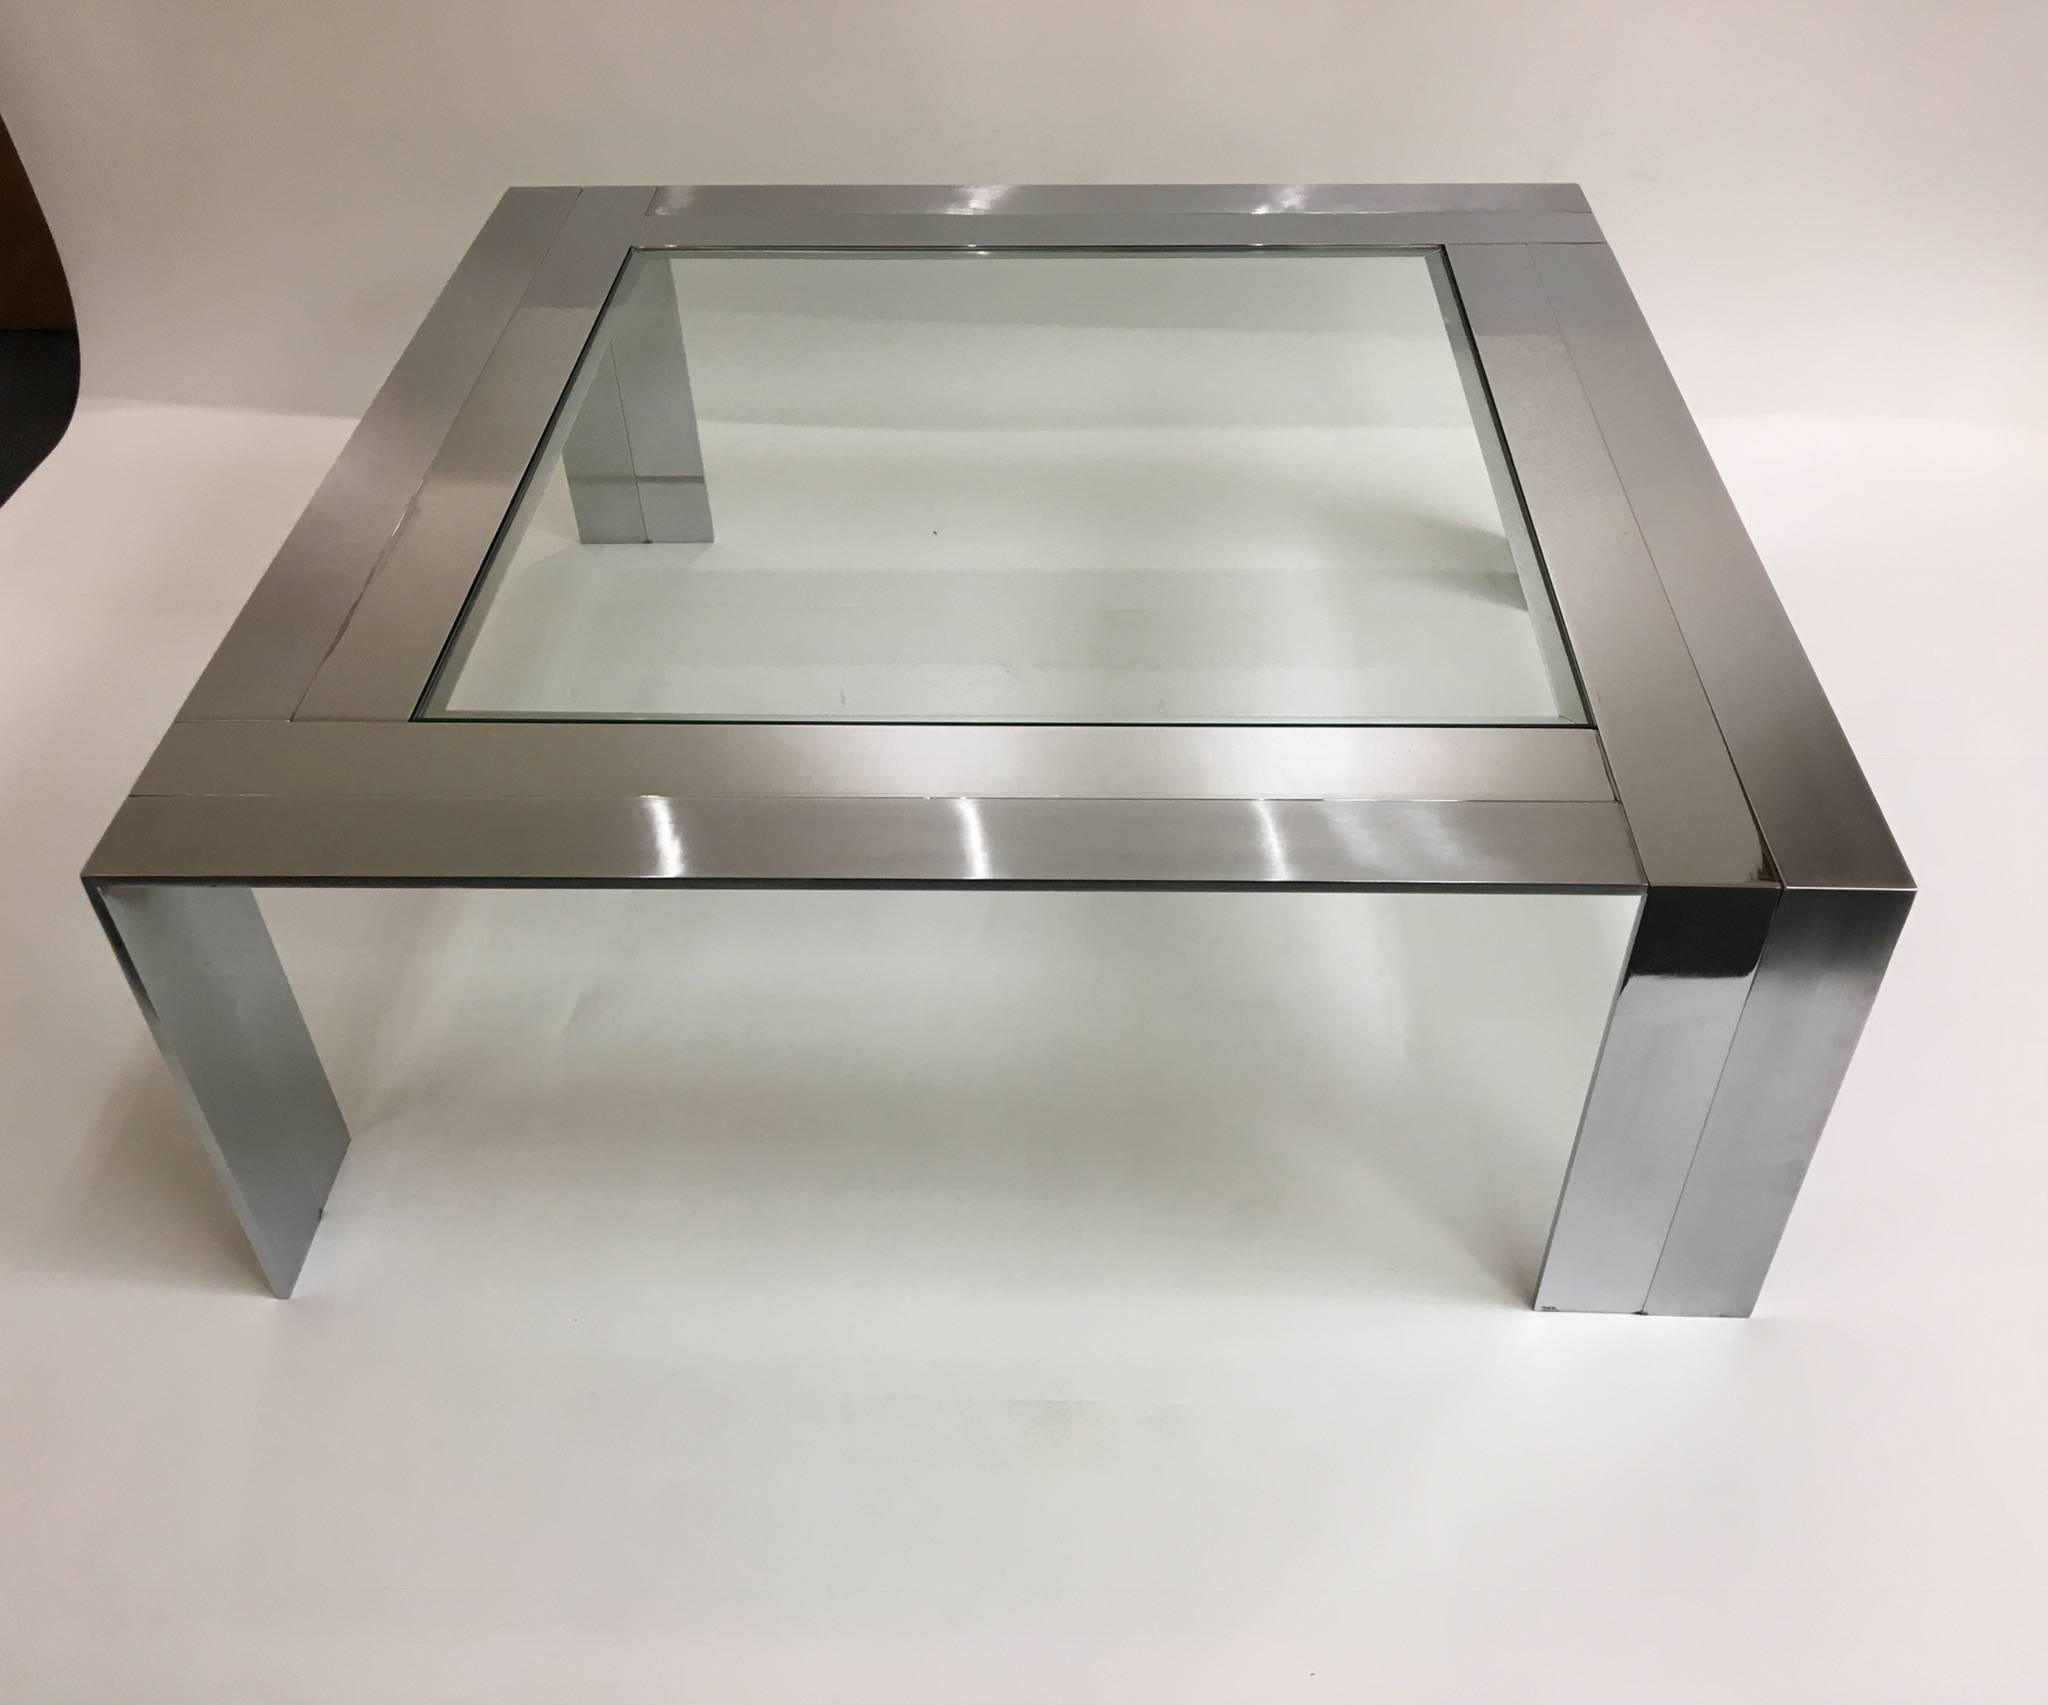 Late 20th Century Stainless Steel and Glass Cocktail Table by Elaine Cohen for DIA For Sale